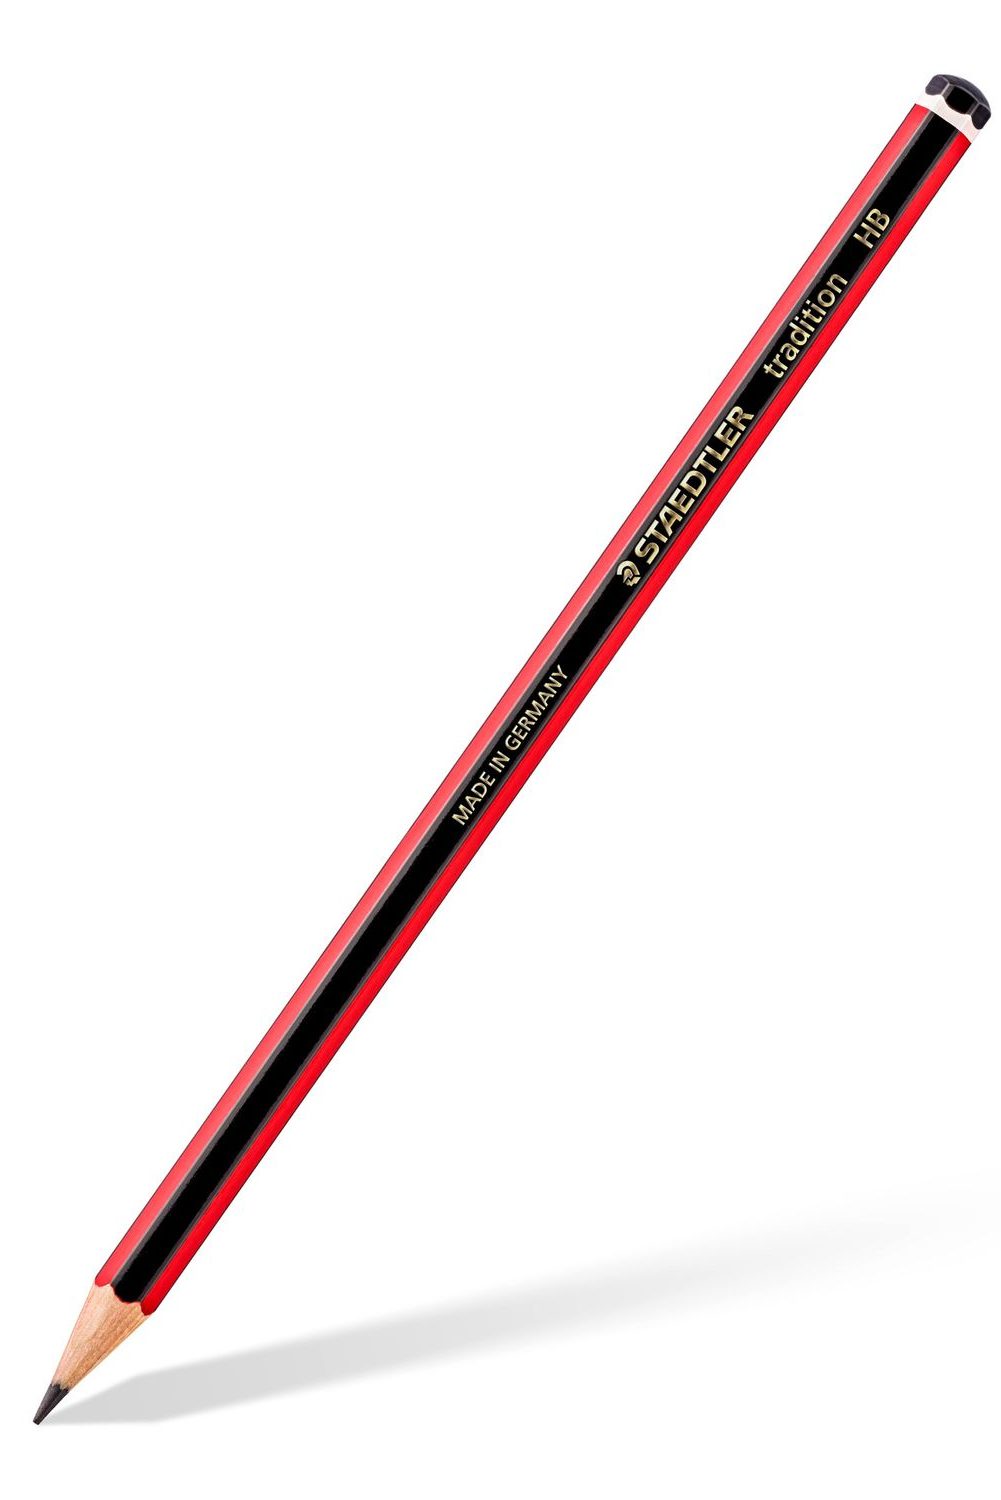 pencil-red-and-black-e1592917696184.jpeg